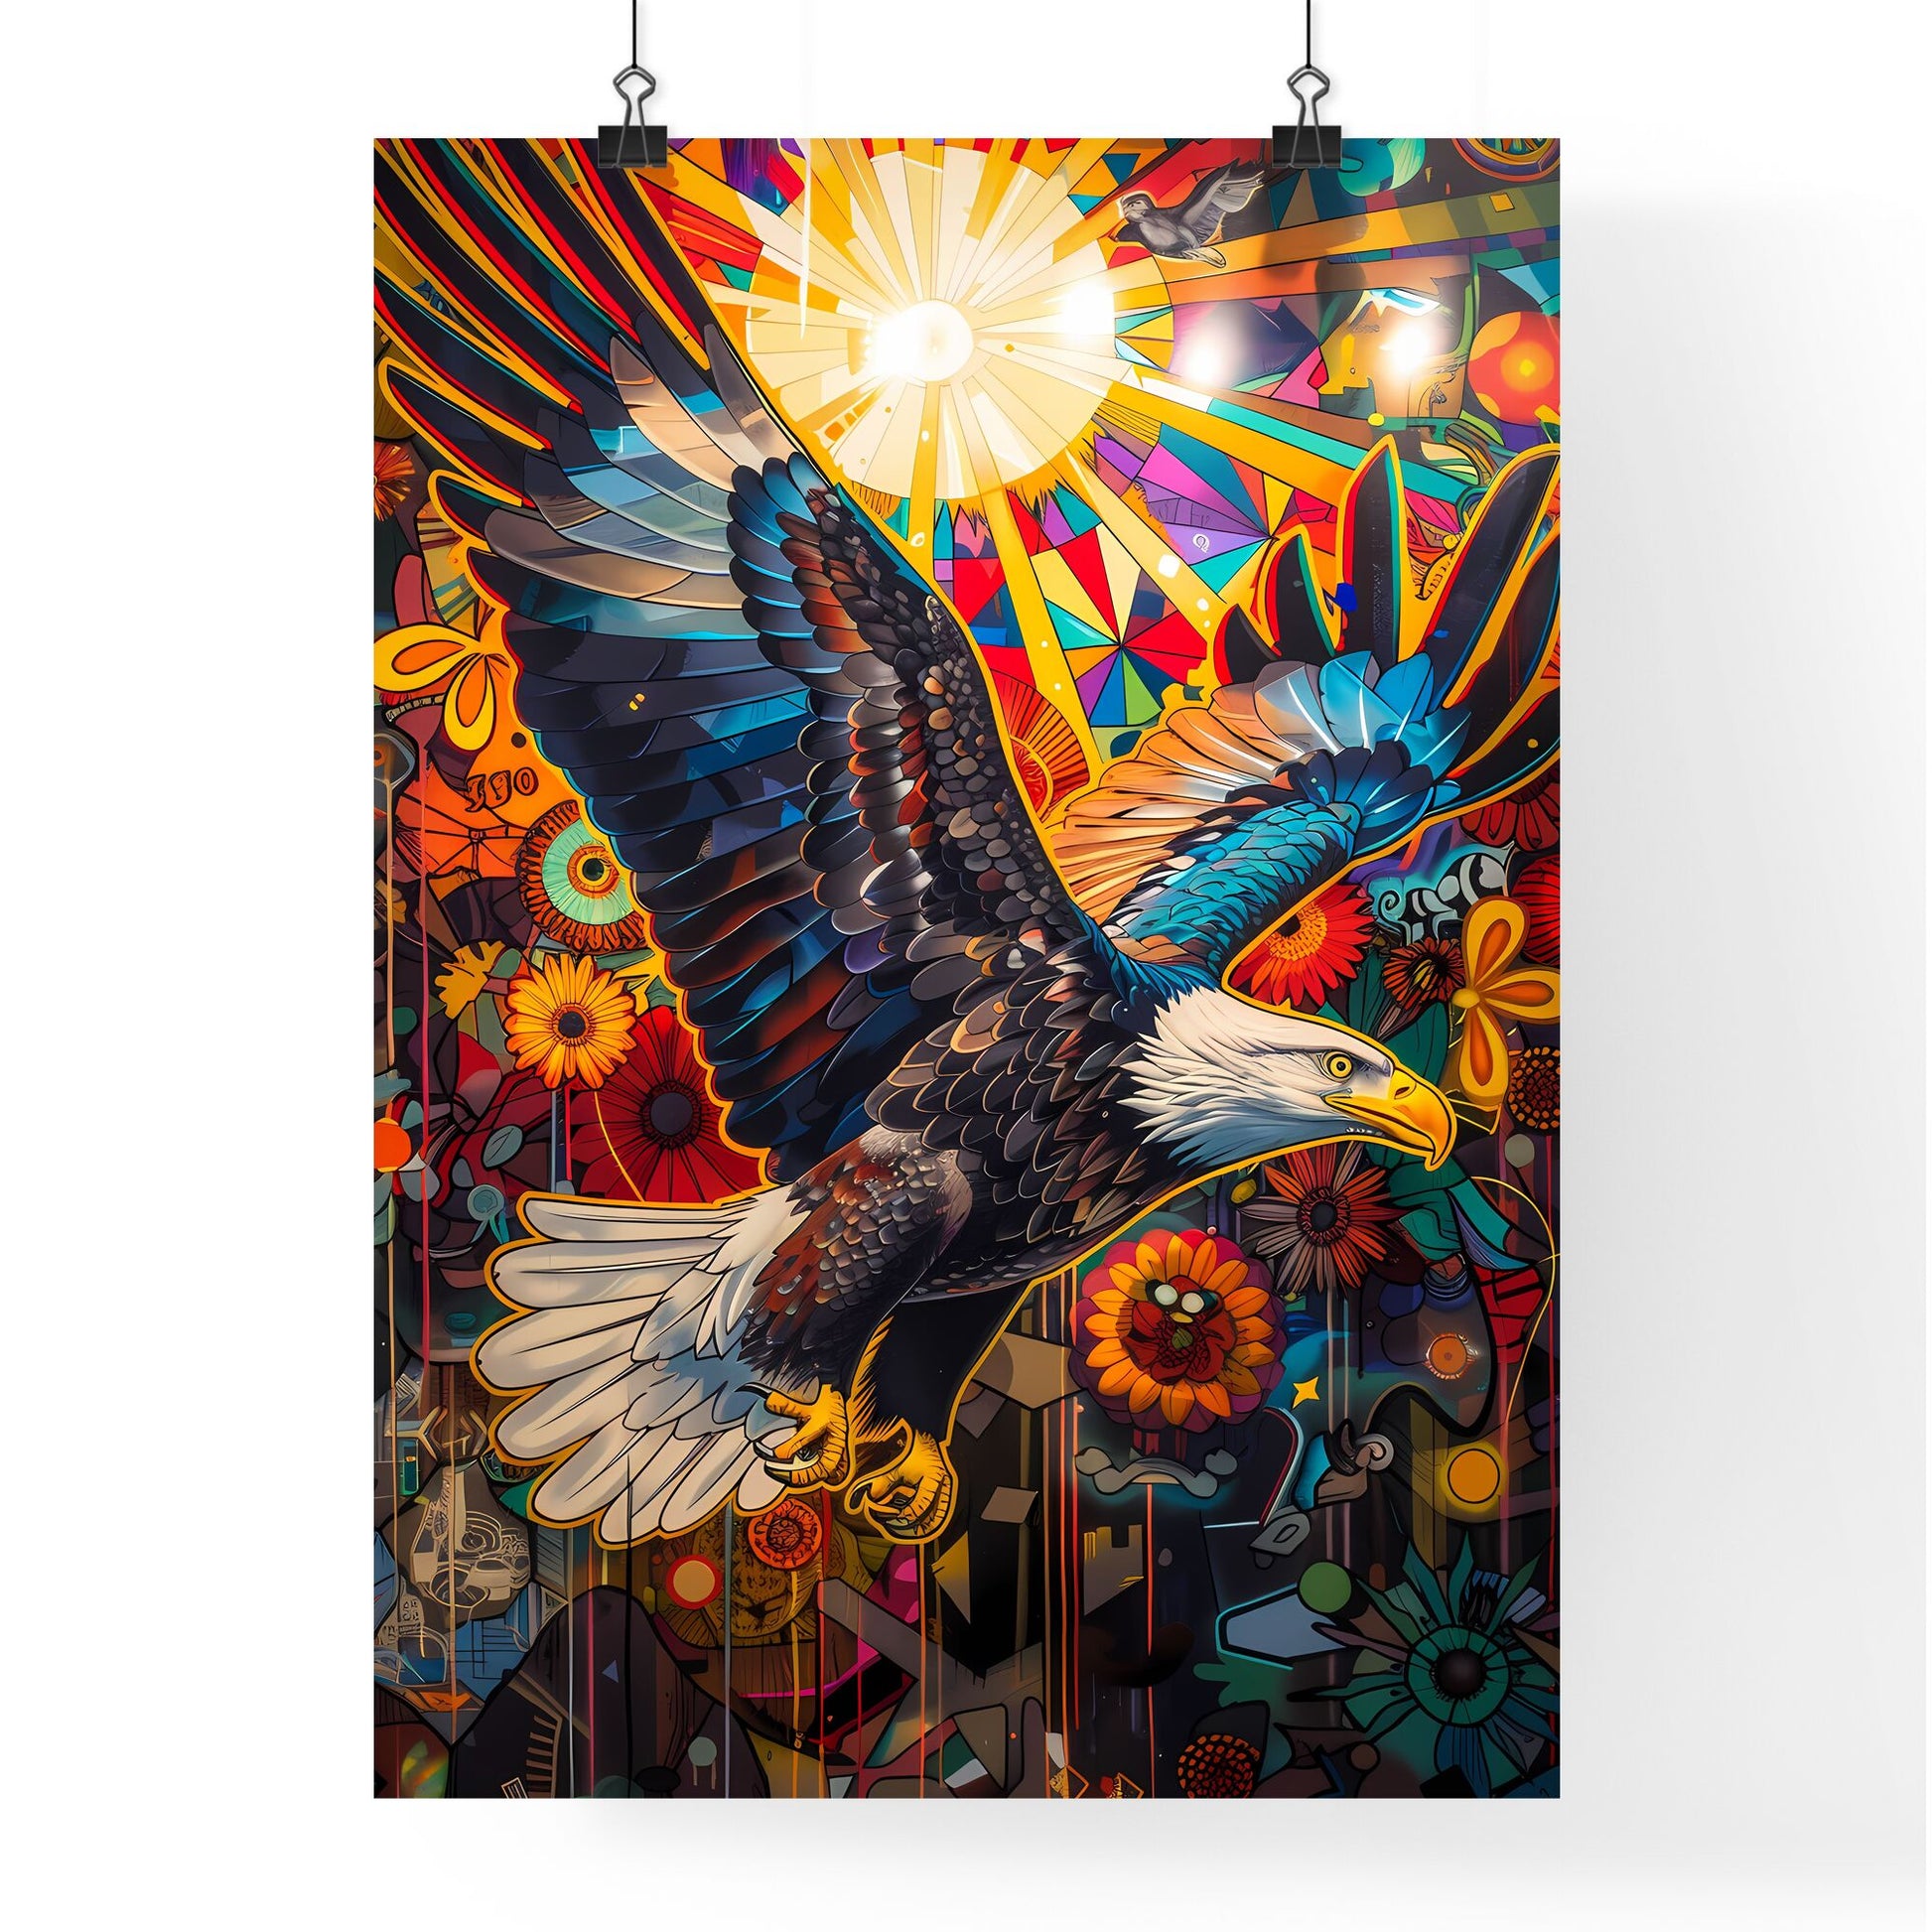 Psychedelic Eagle Soaring Amidst Vibrant Pop Art Landscape, Graffiti, Stained Glass, and Ray of Sunlight Default Title